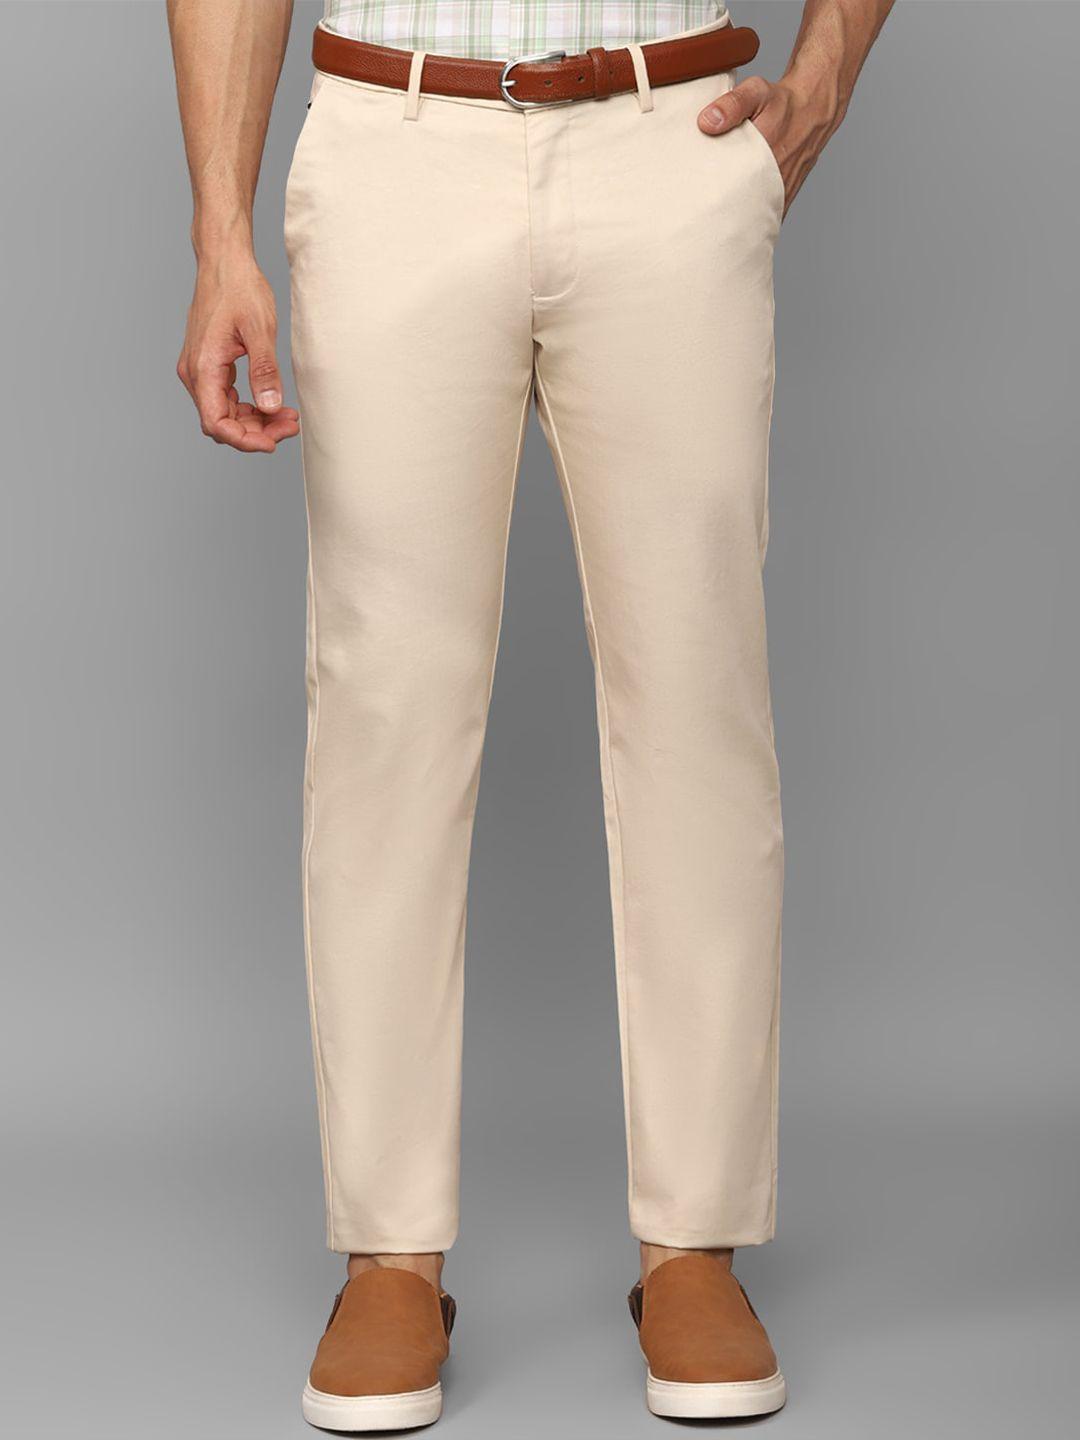 allen solly men mid rise chinos trousers